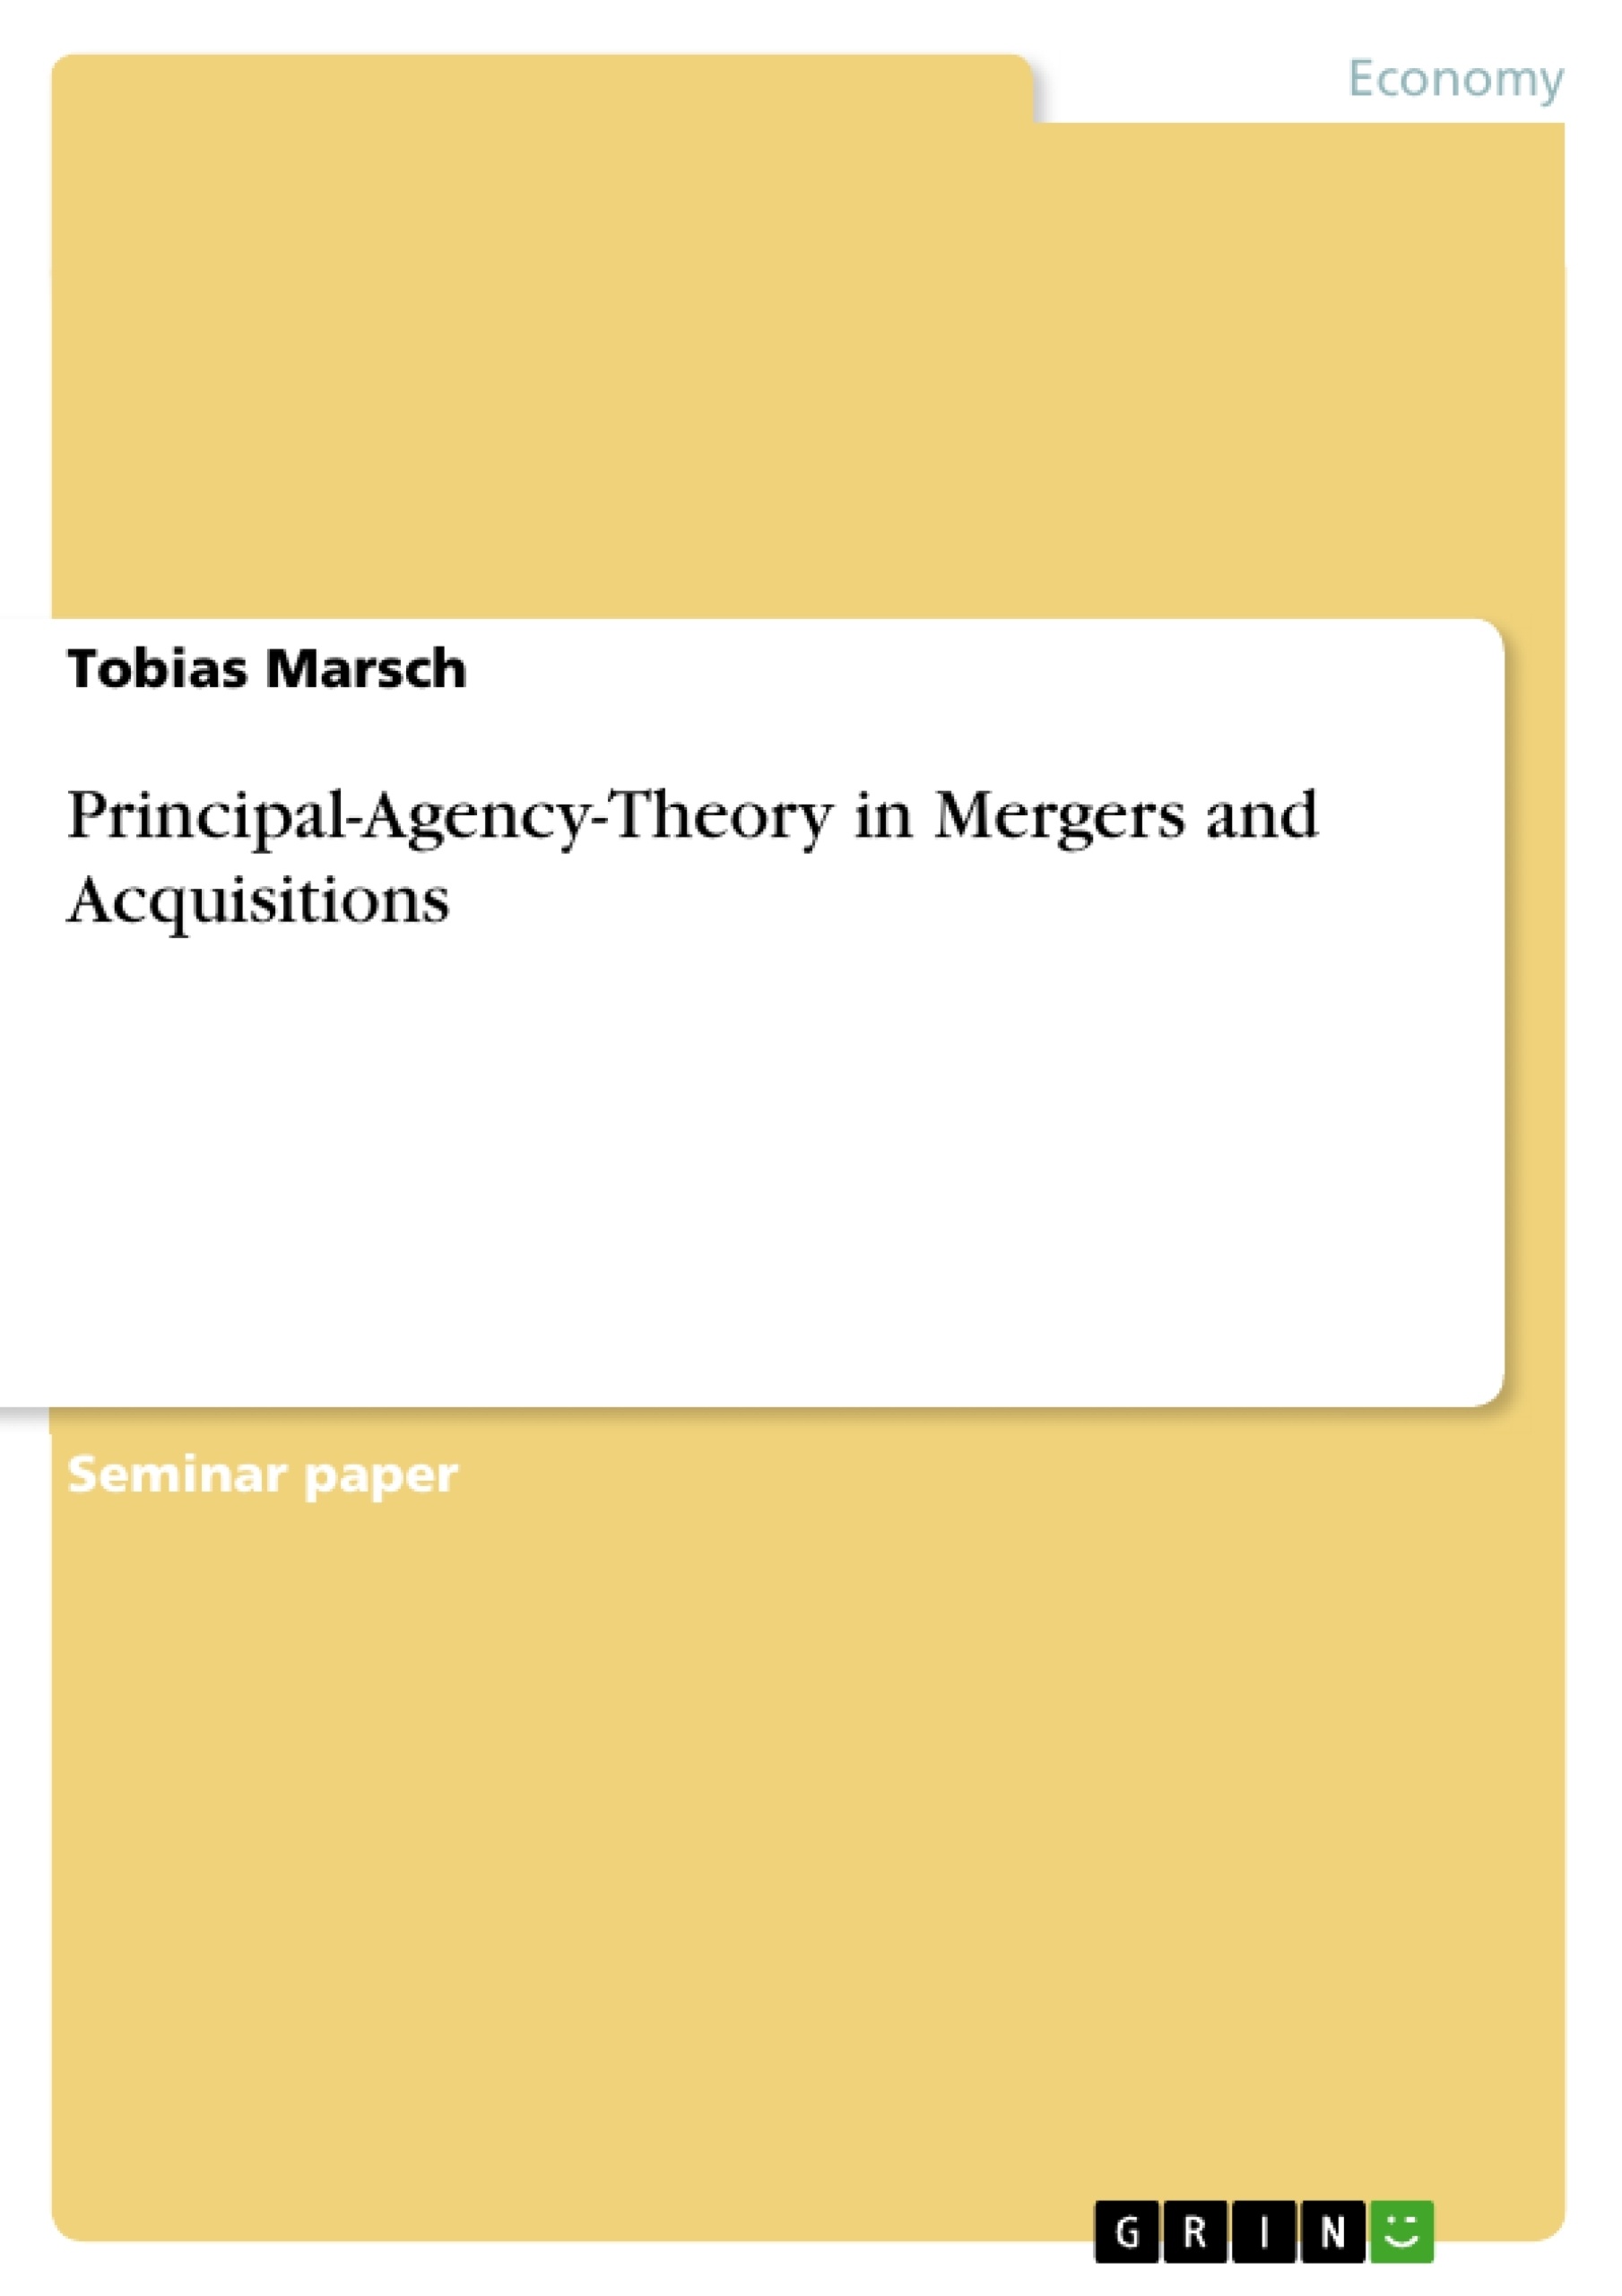 Title: Principal-Agency-Theory in Mergers and Acquisitions